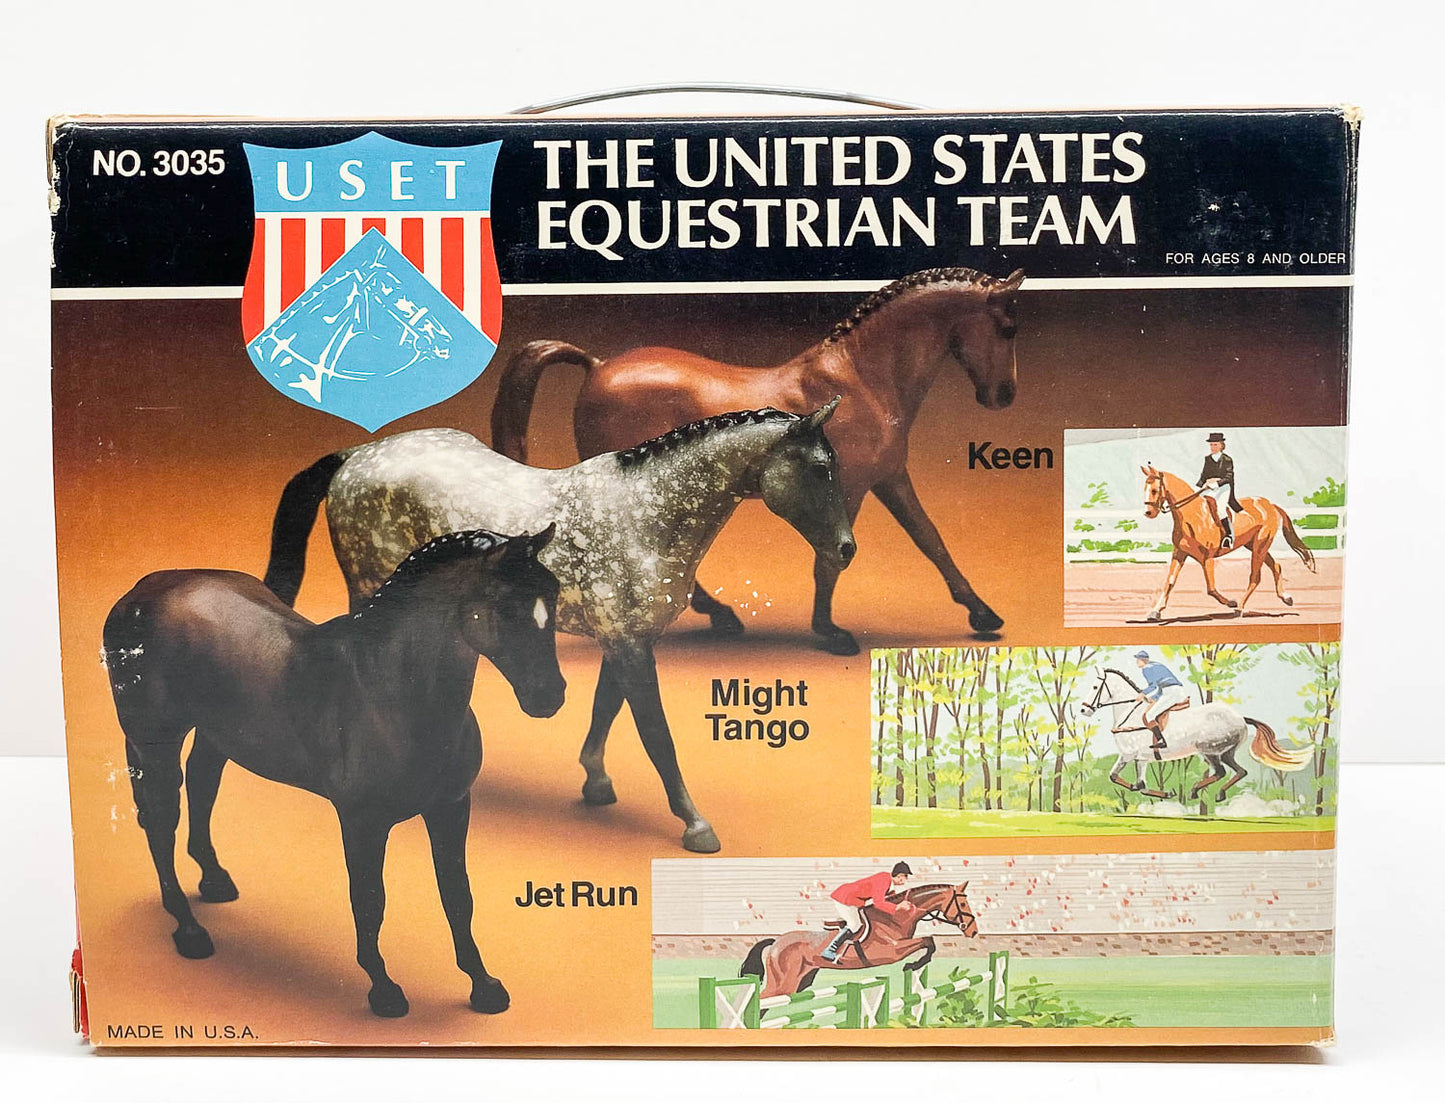 US Equestrian Team: Jet Run, Might Tango and Keen